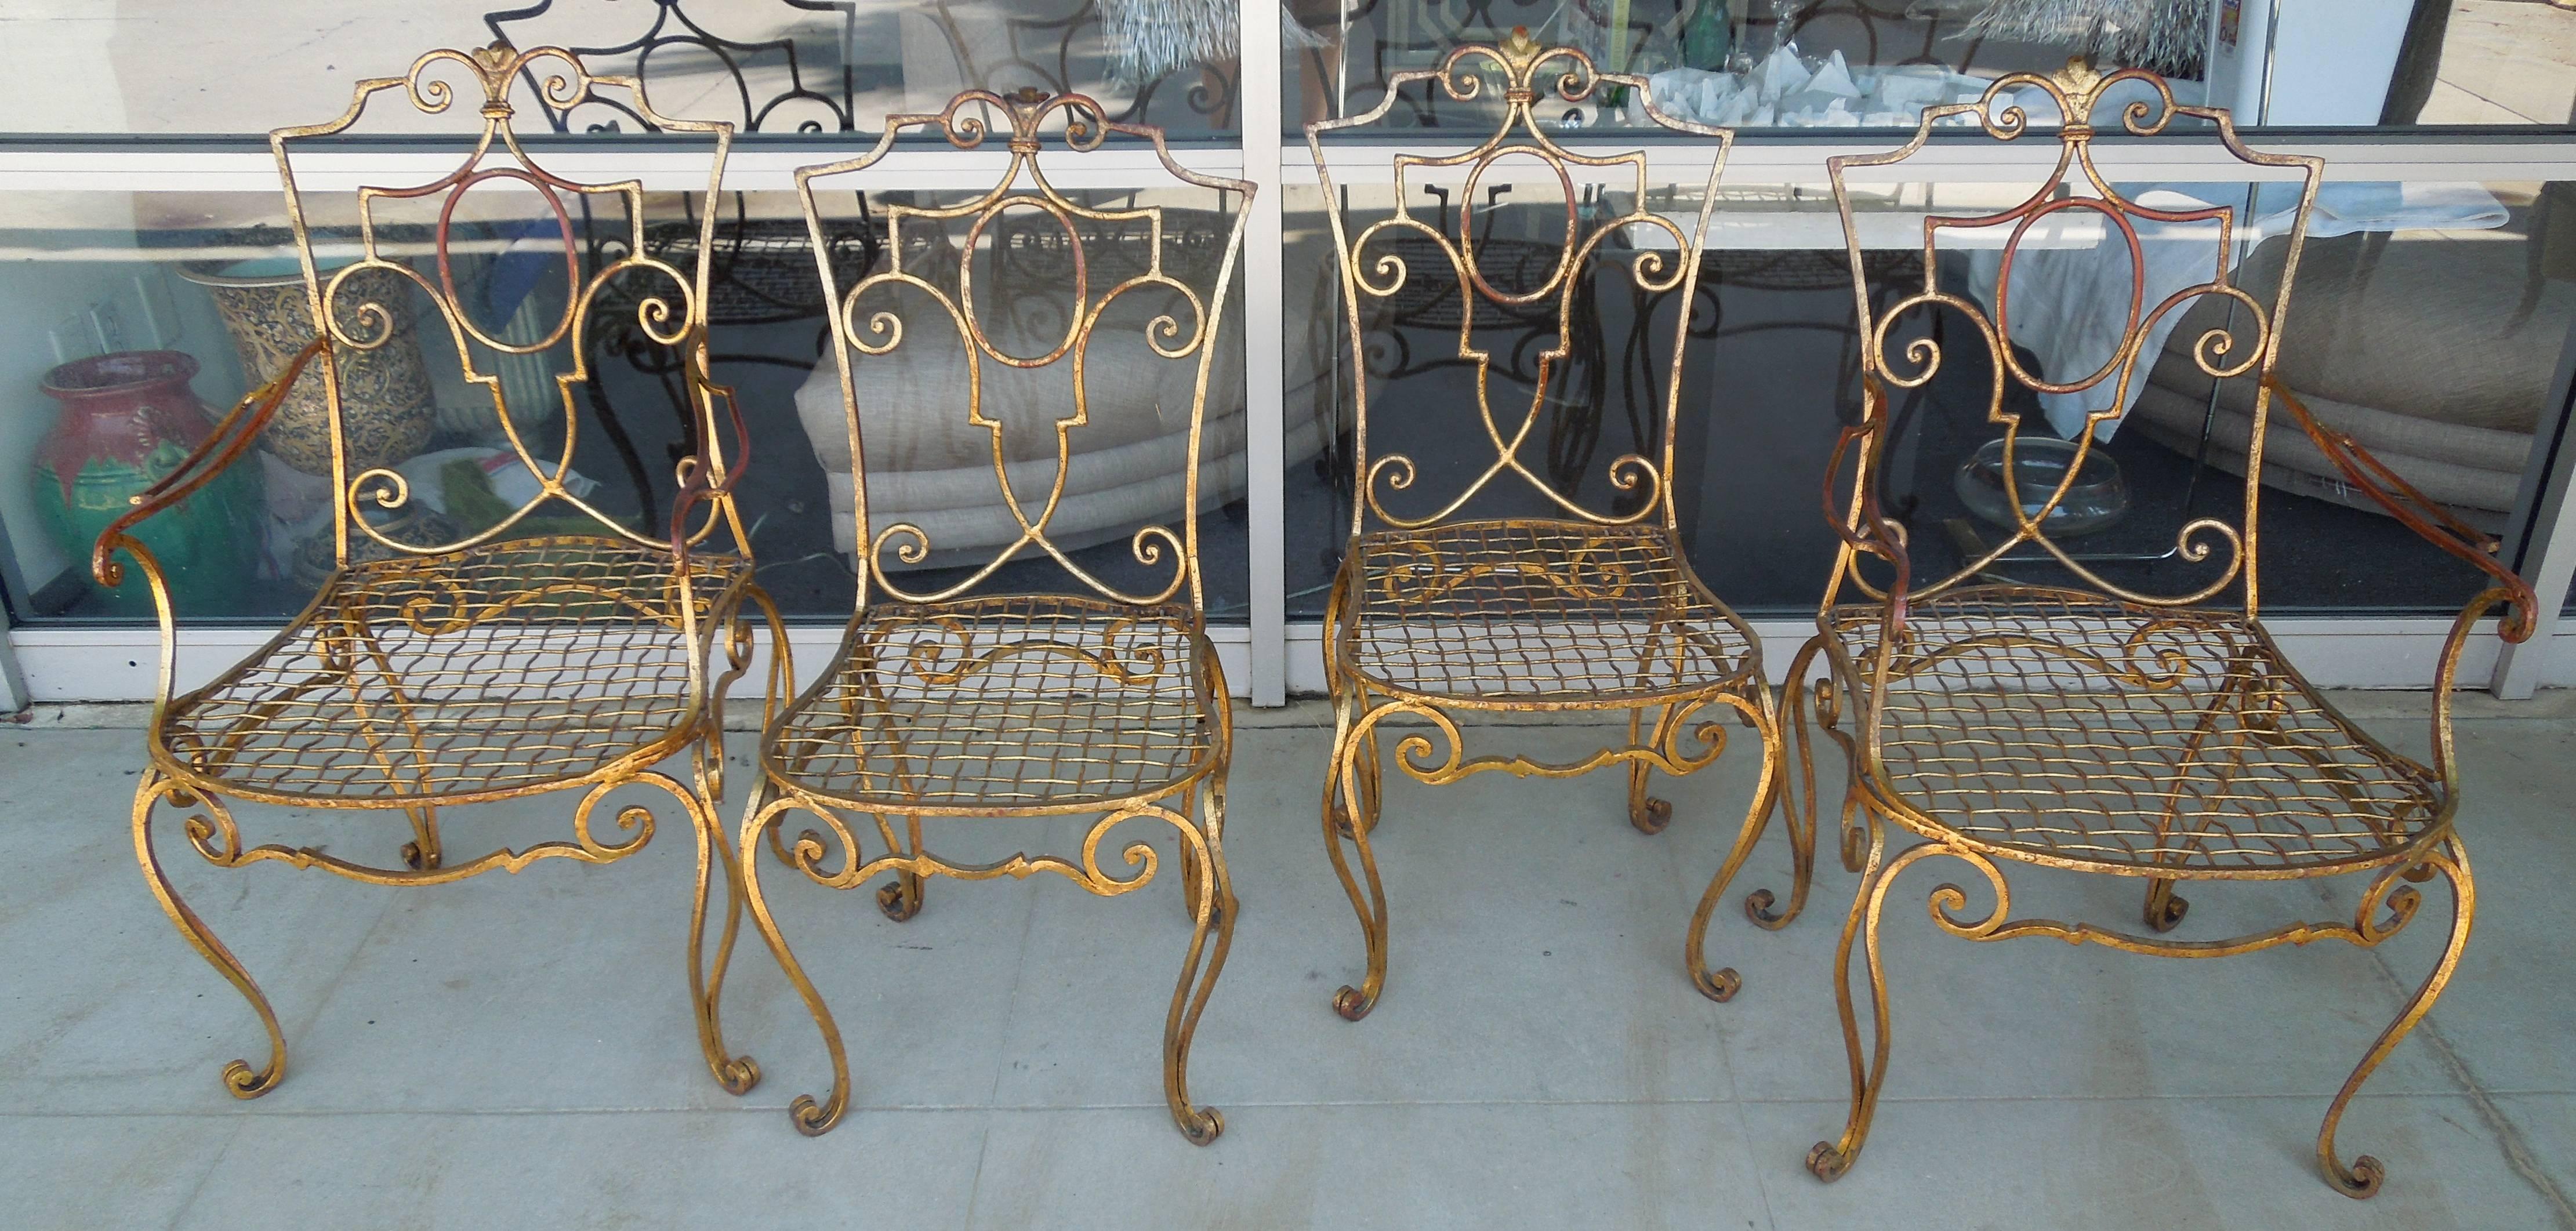 Romantic French Moderne Set of Four Gold Gilt Iron Chairs by Jean-Charles Moreux